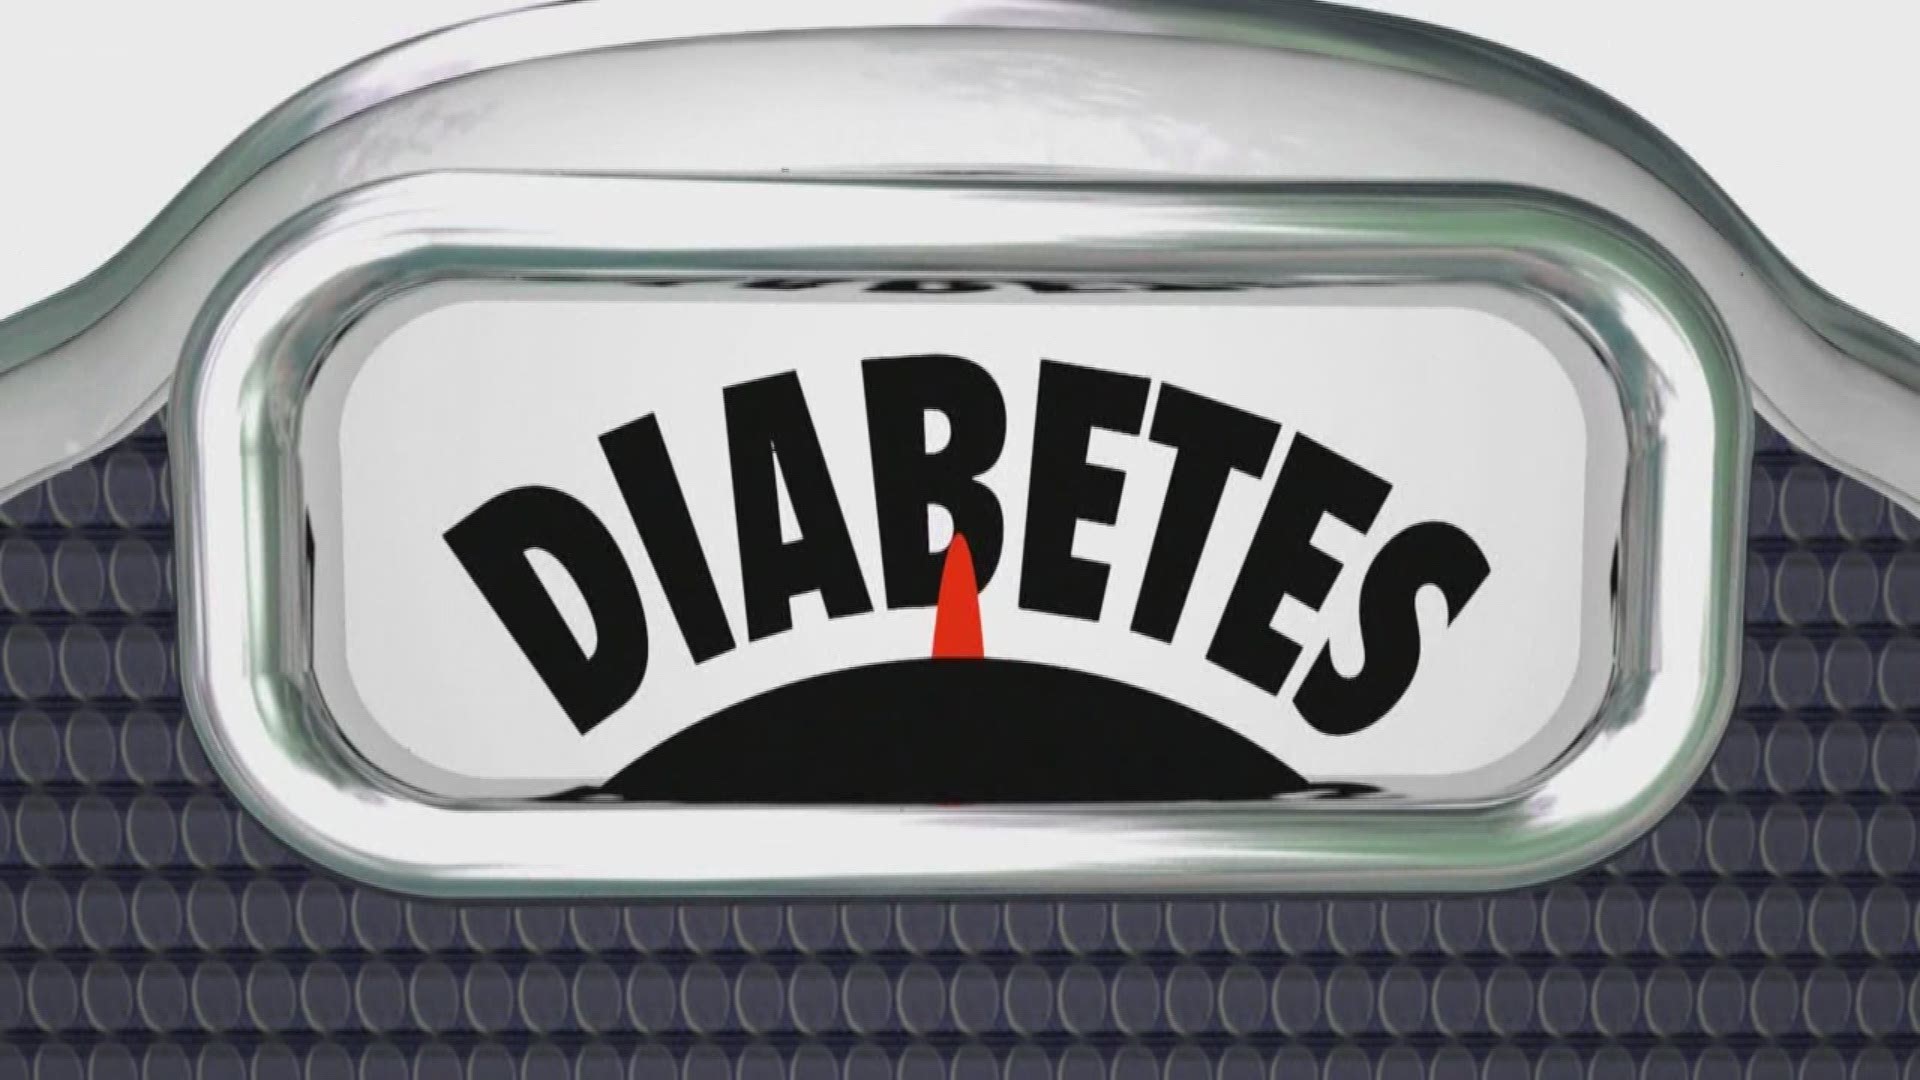 One diabetes patient was able to cut her number of medications from three to one after starting regular exercise.